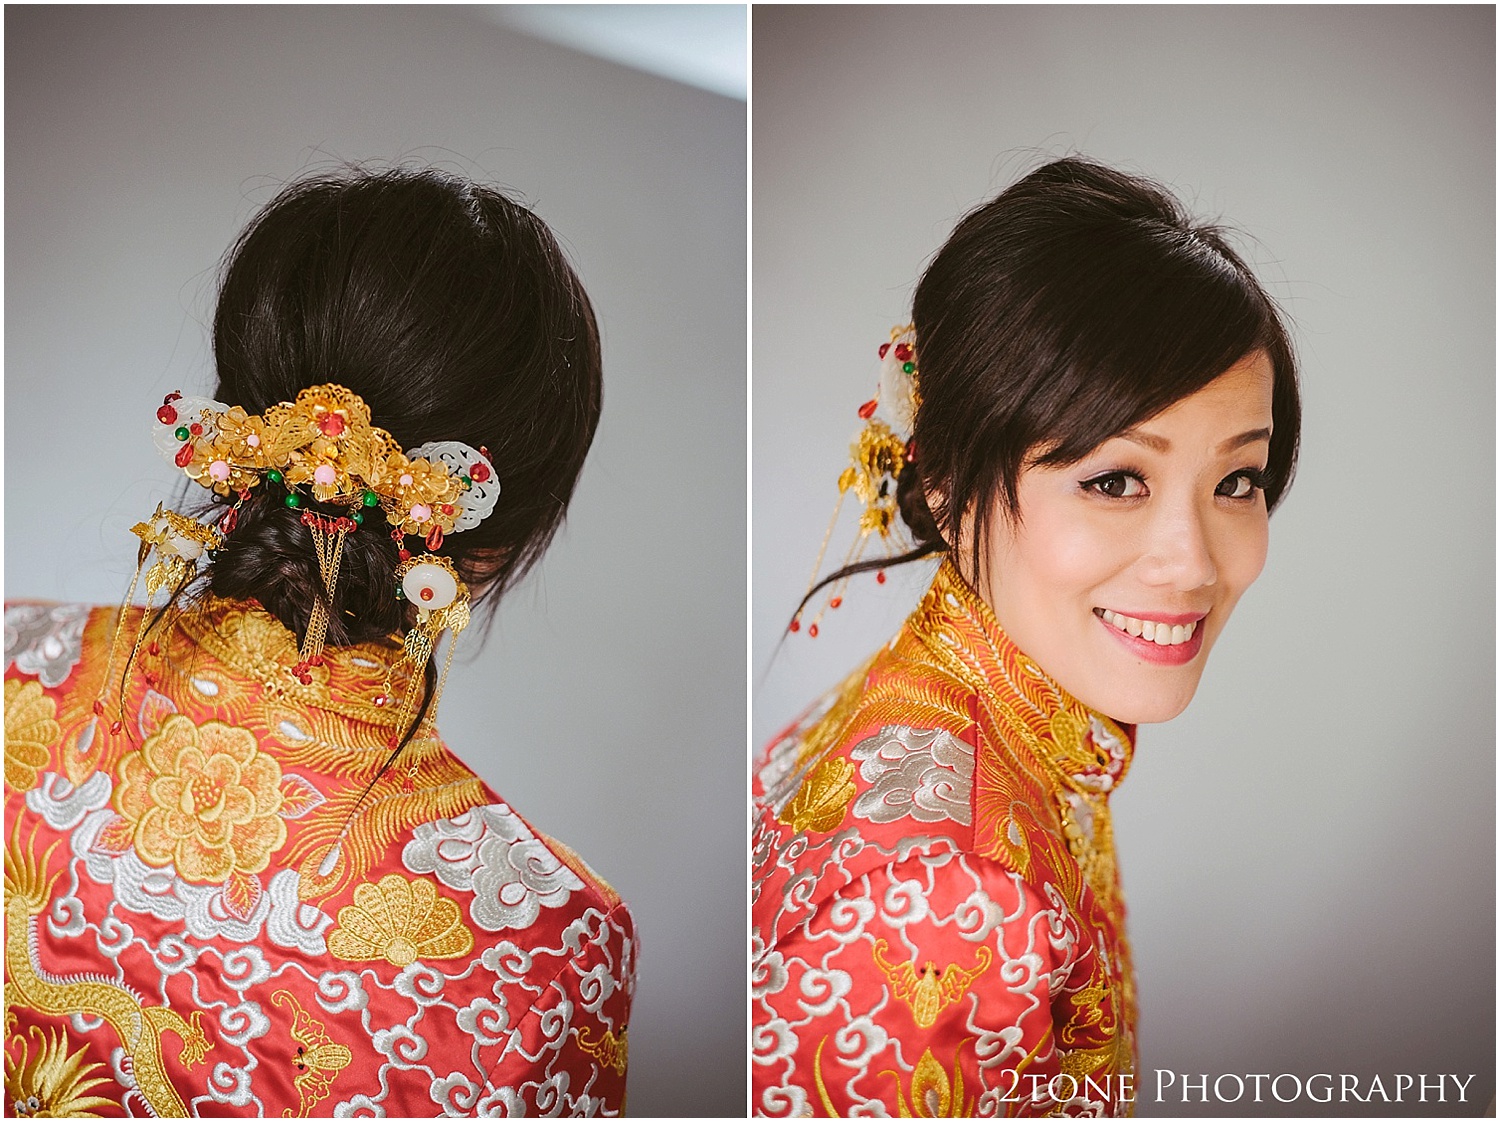 Planning a Chinese wedding? Handy tips here - The Gibsons wedding & family  photography